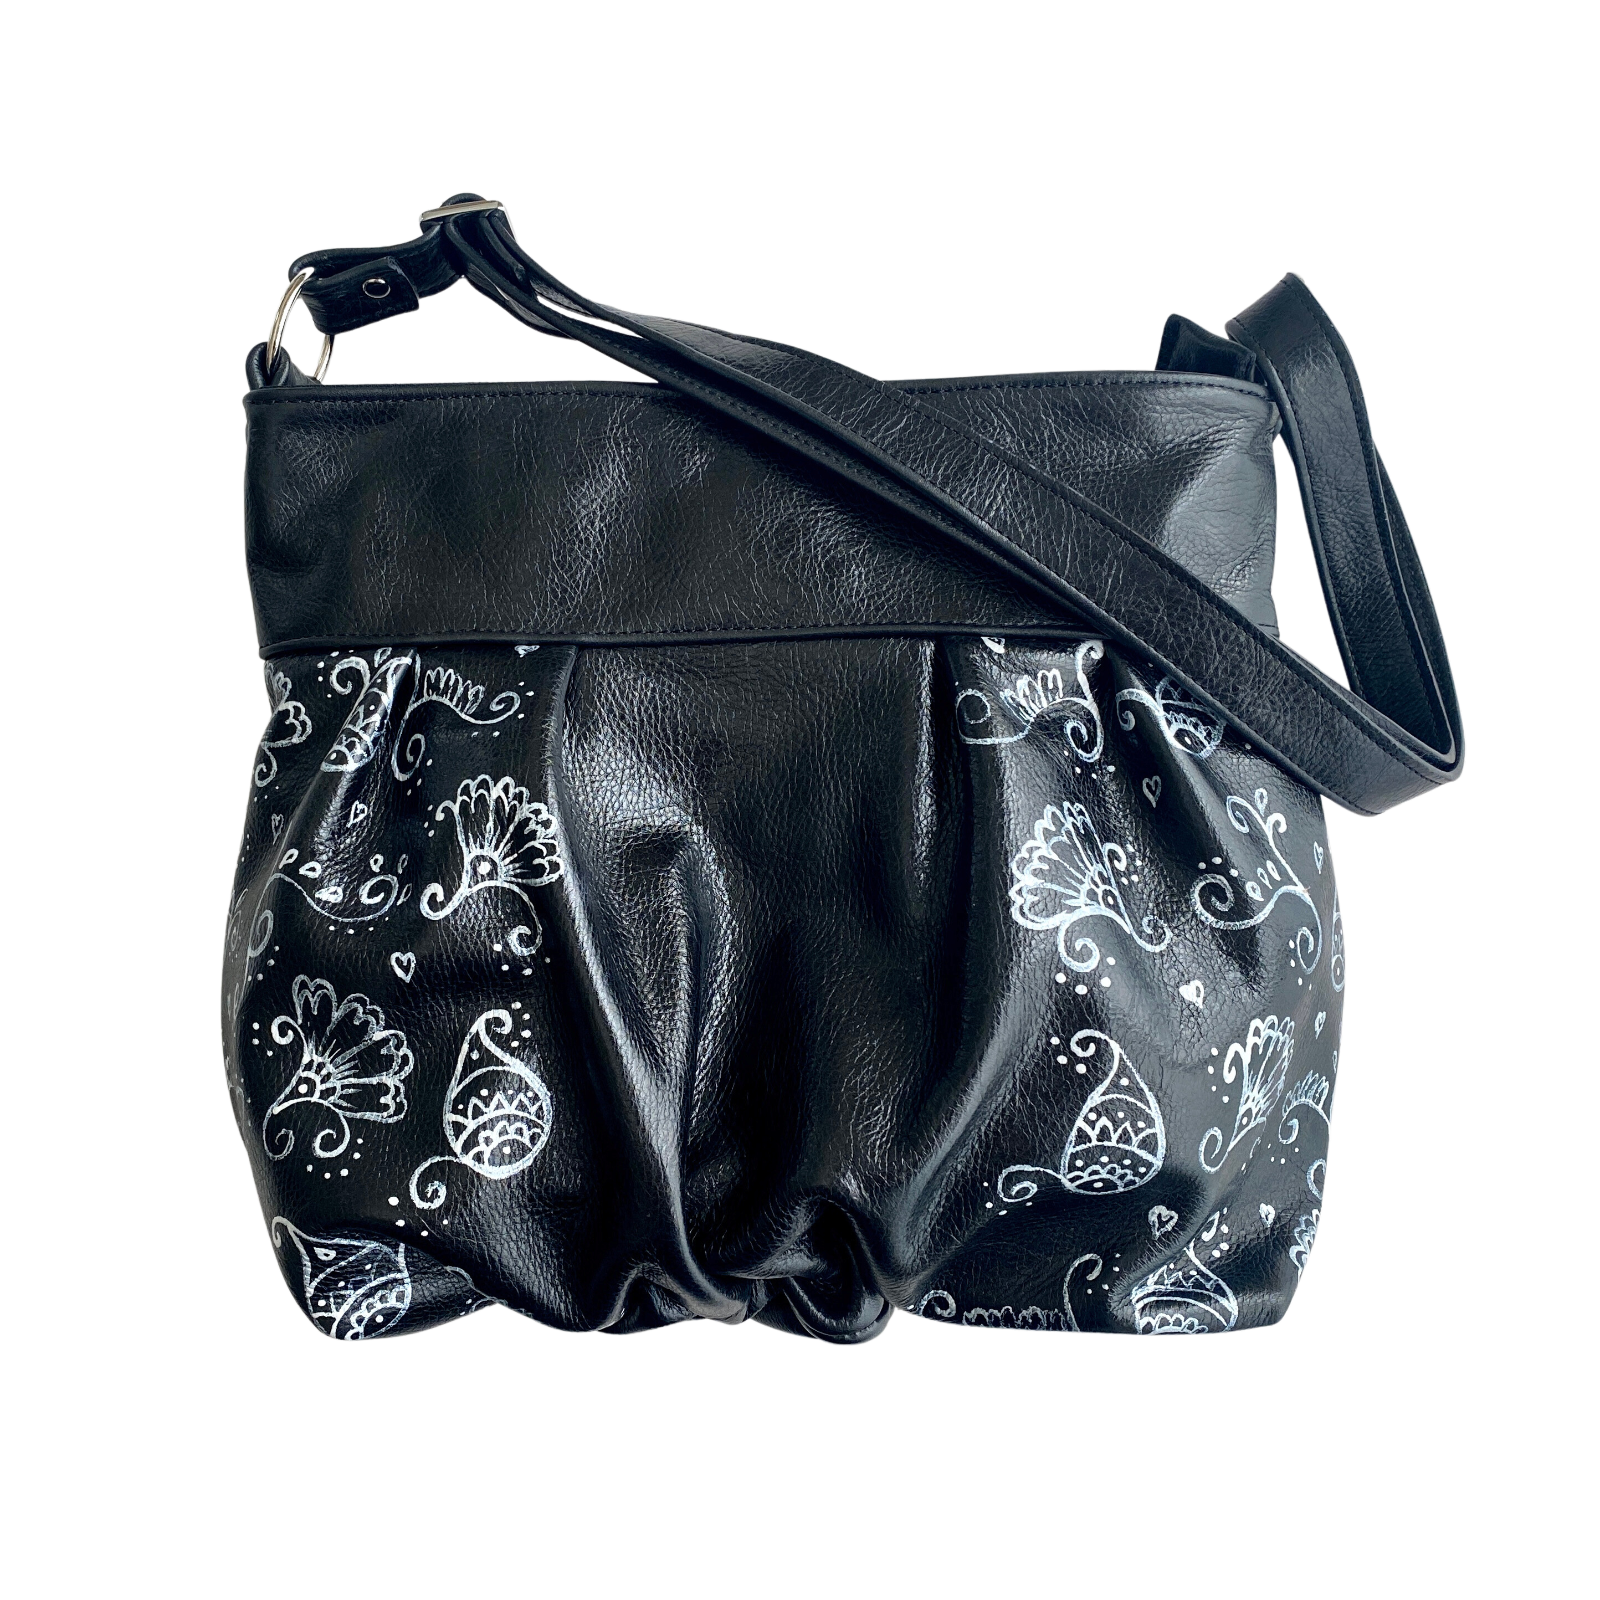 Ruche Mini in Glossy Black, Handpainted Floral, RTS